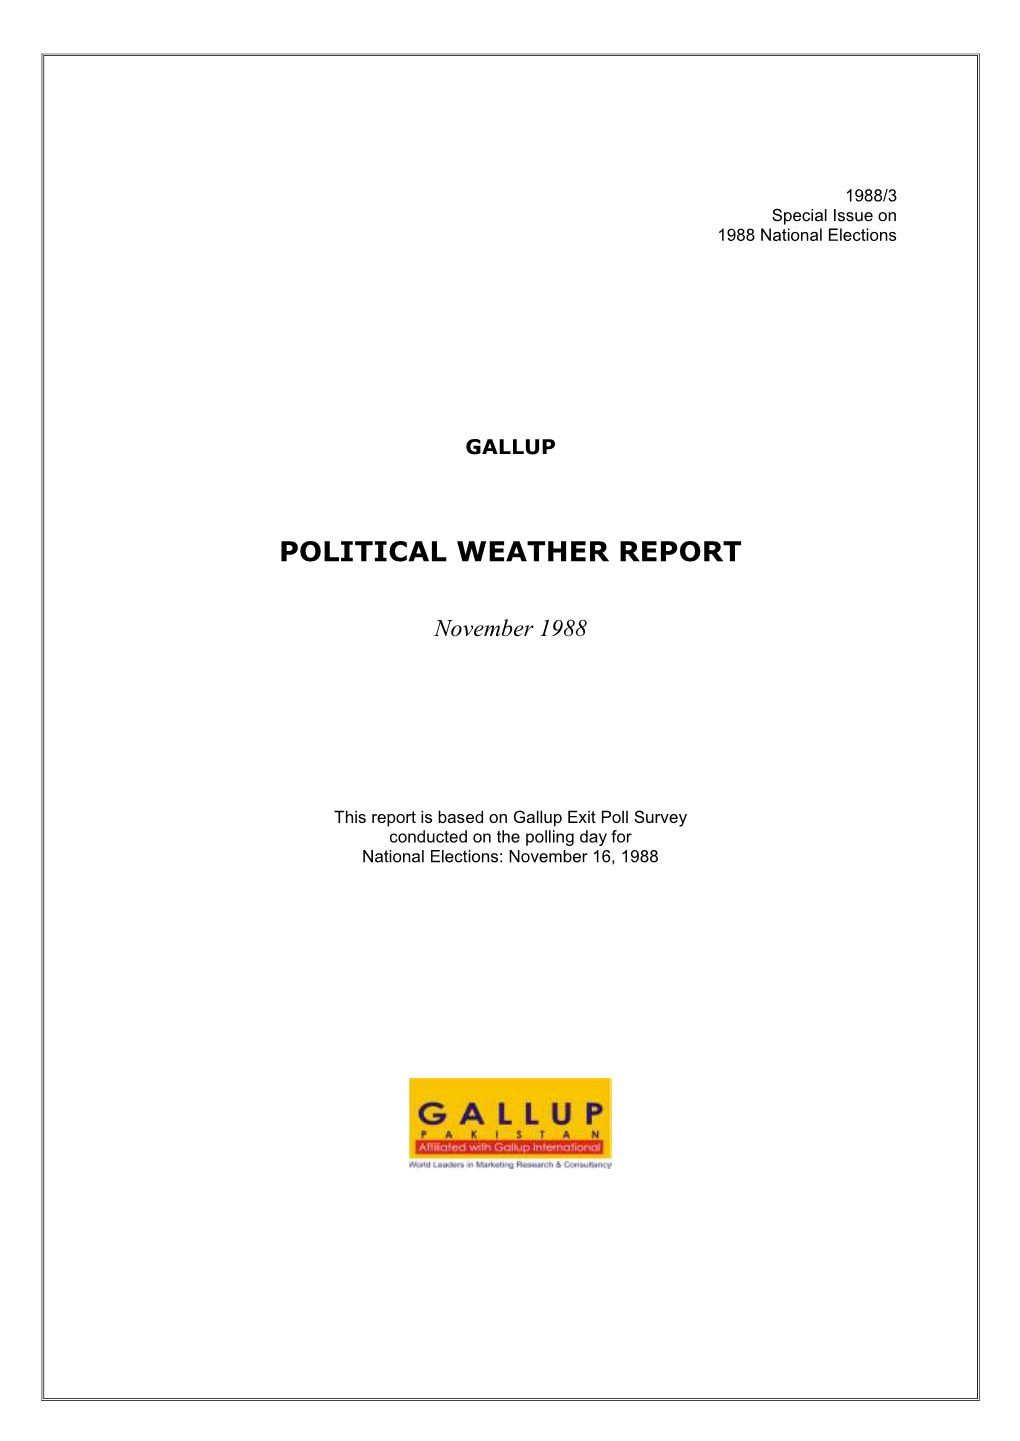 Political Weather Report